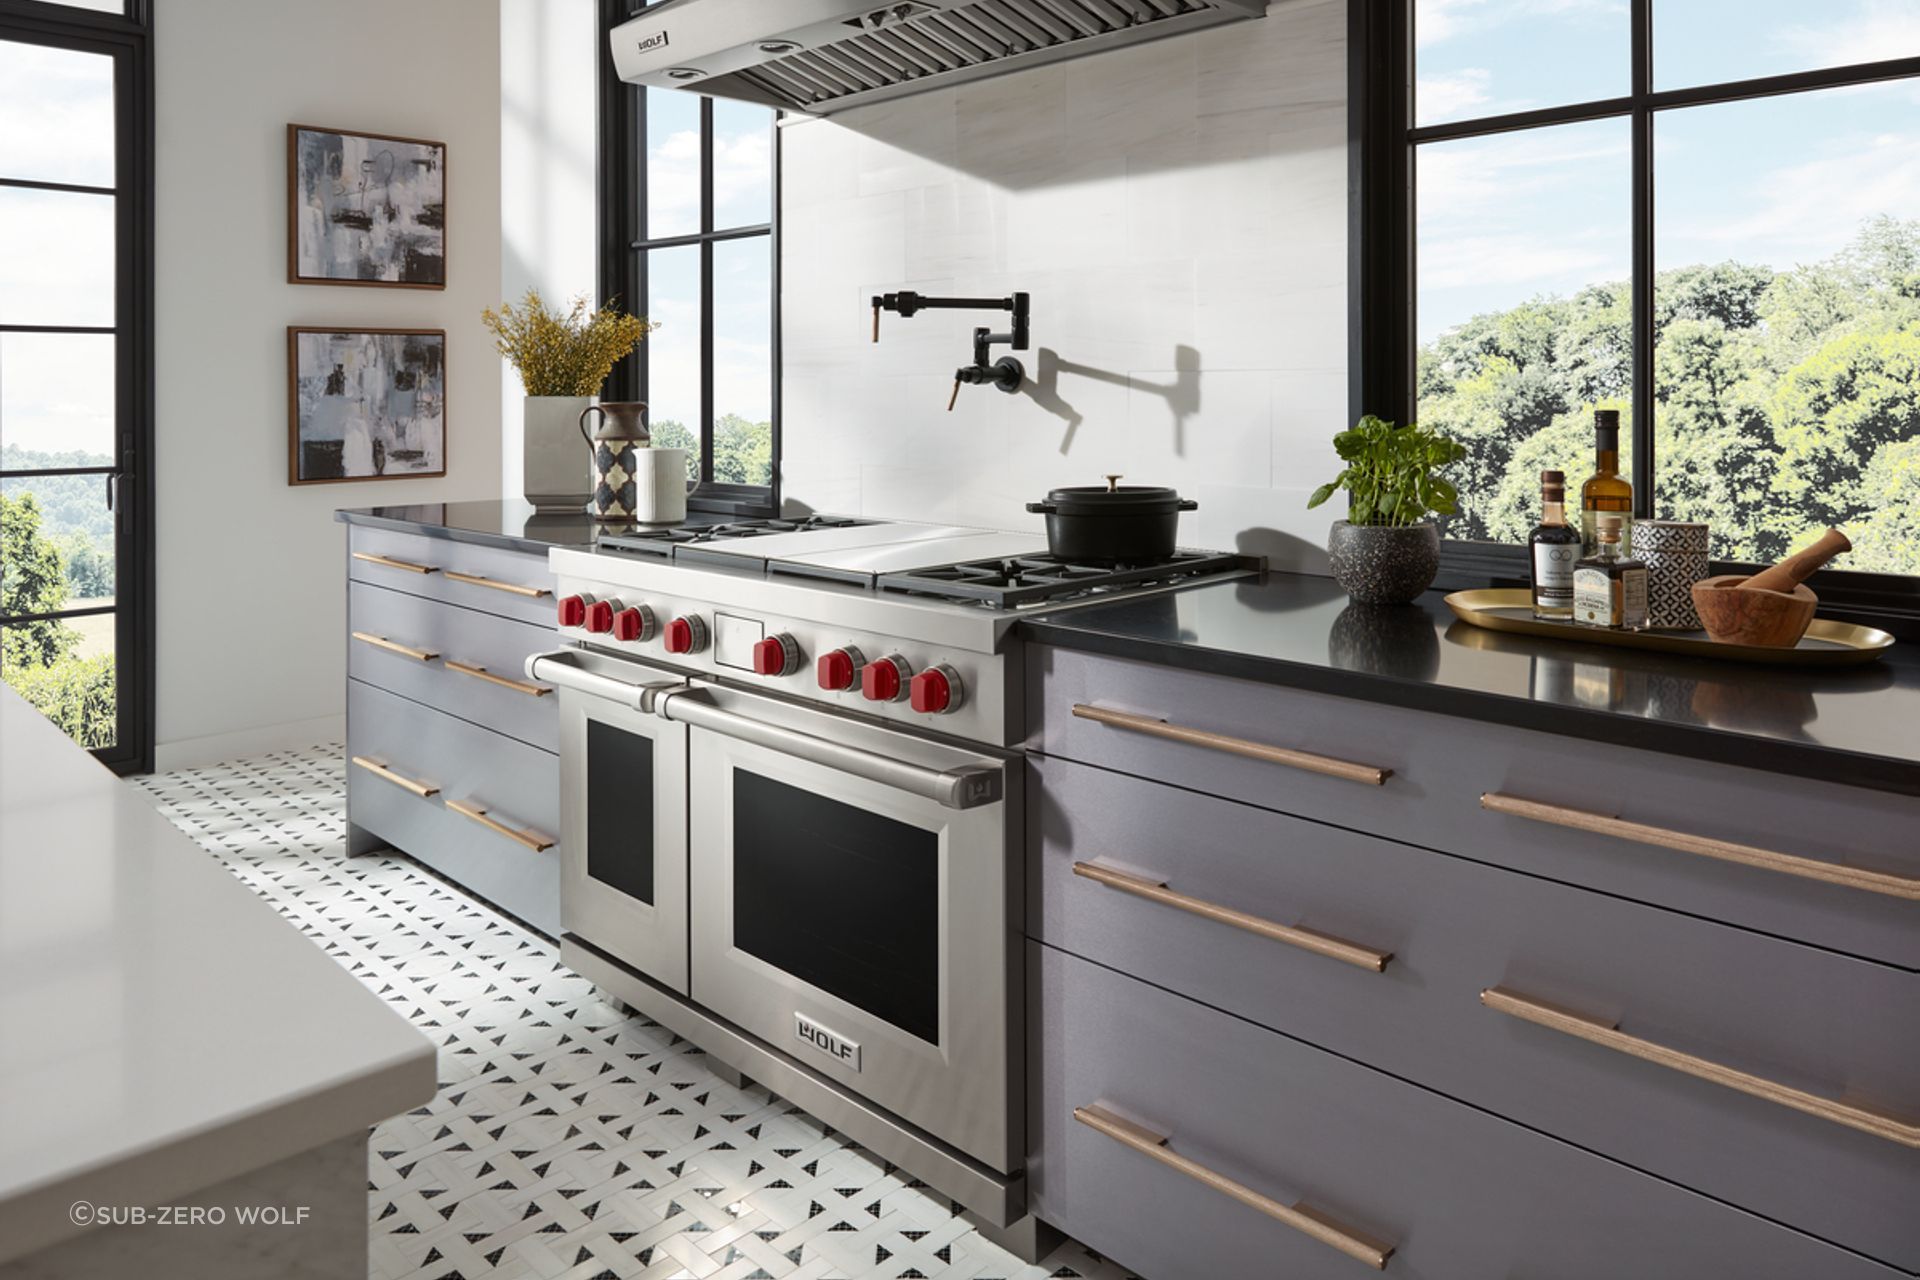 The Wolf Dual Fuel Range combines a gas cooktops with an electric dual convection oven